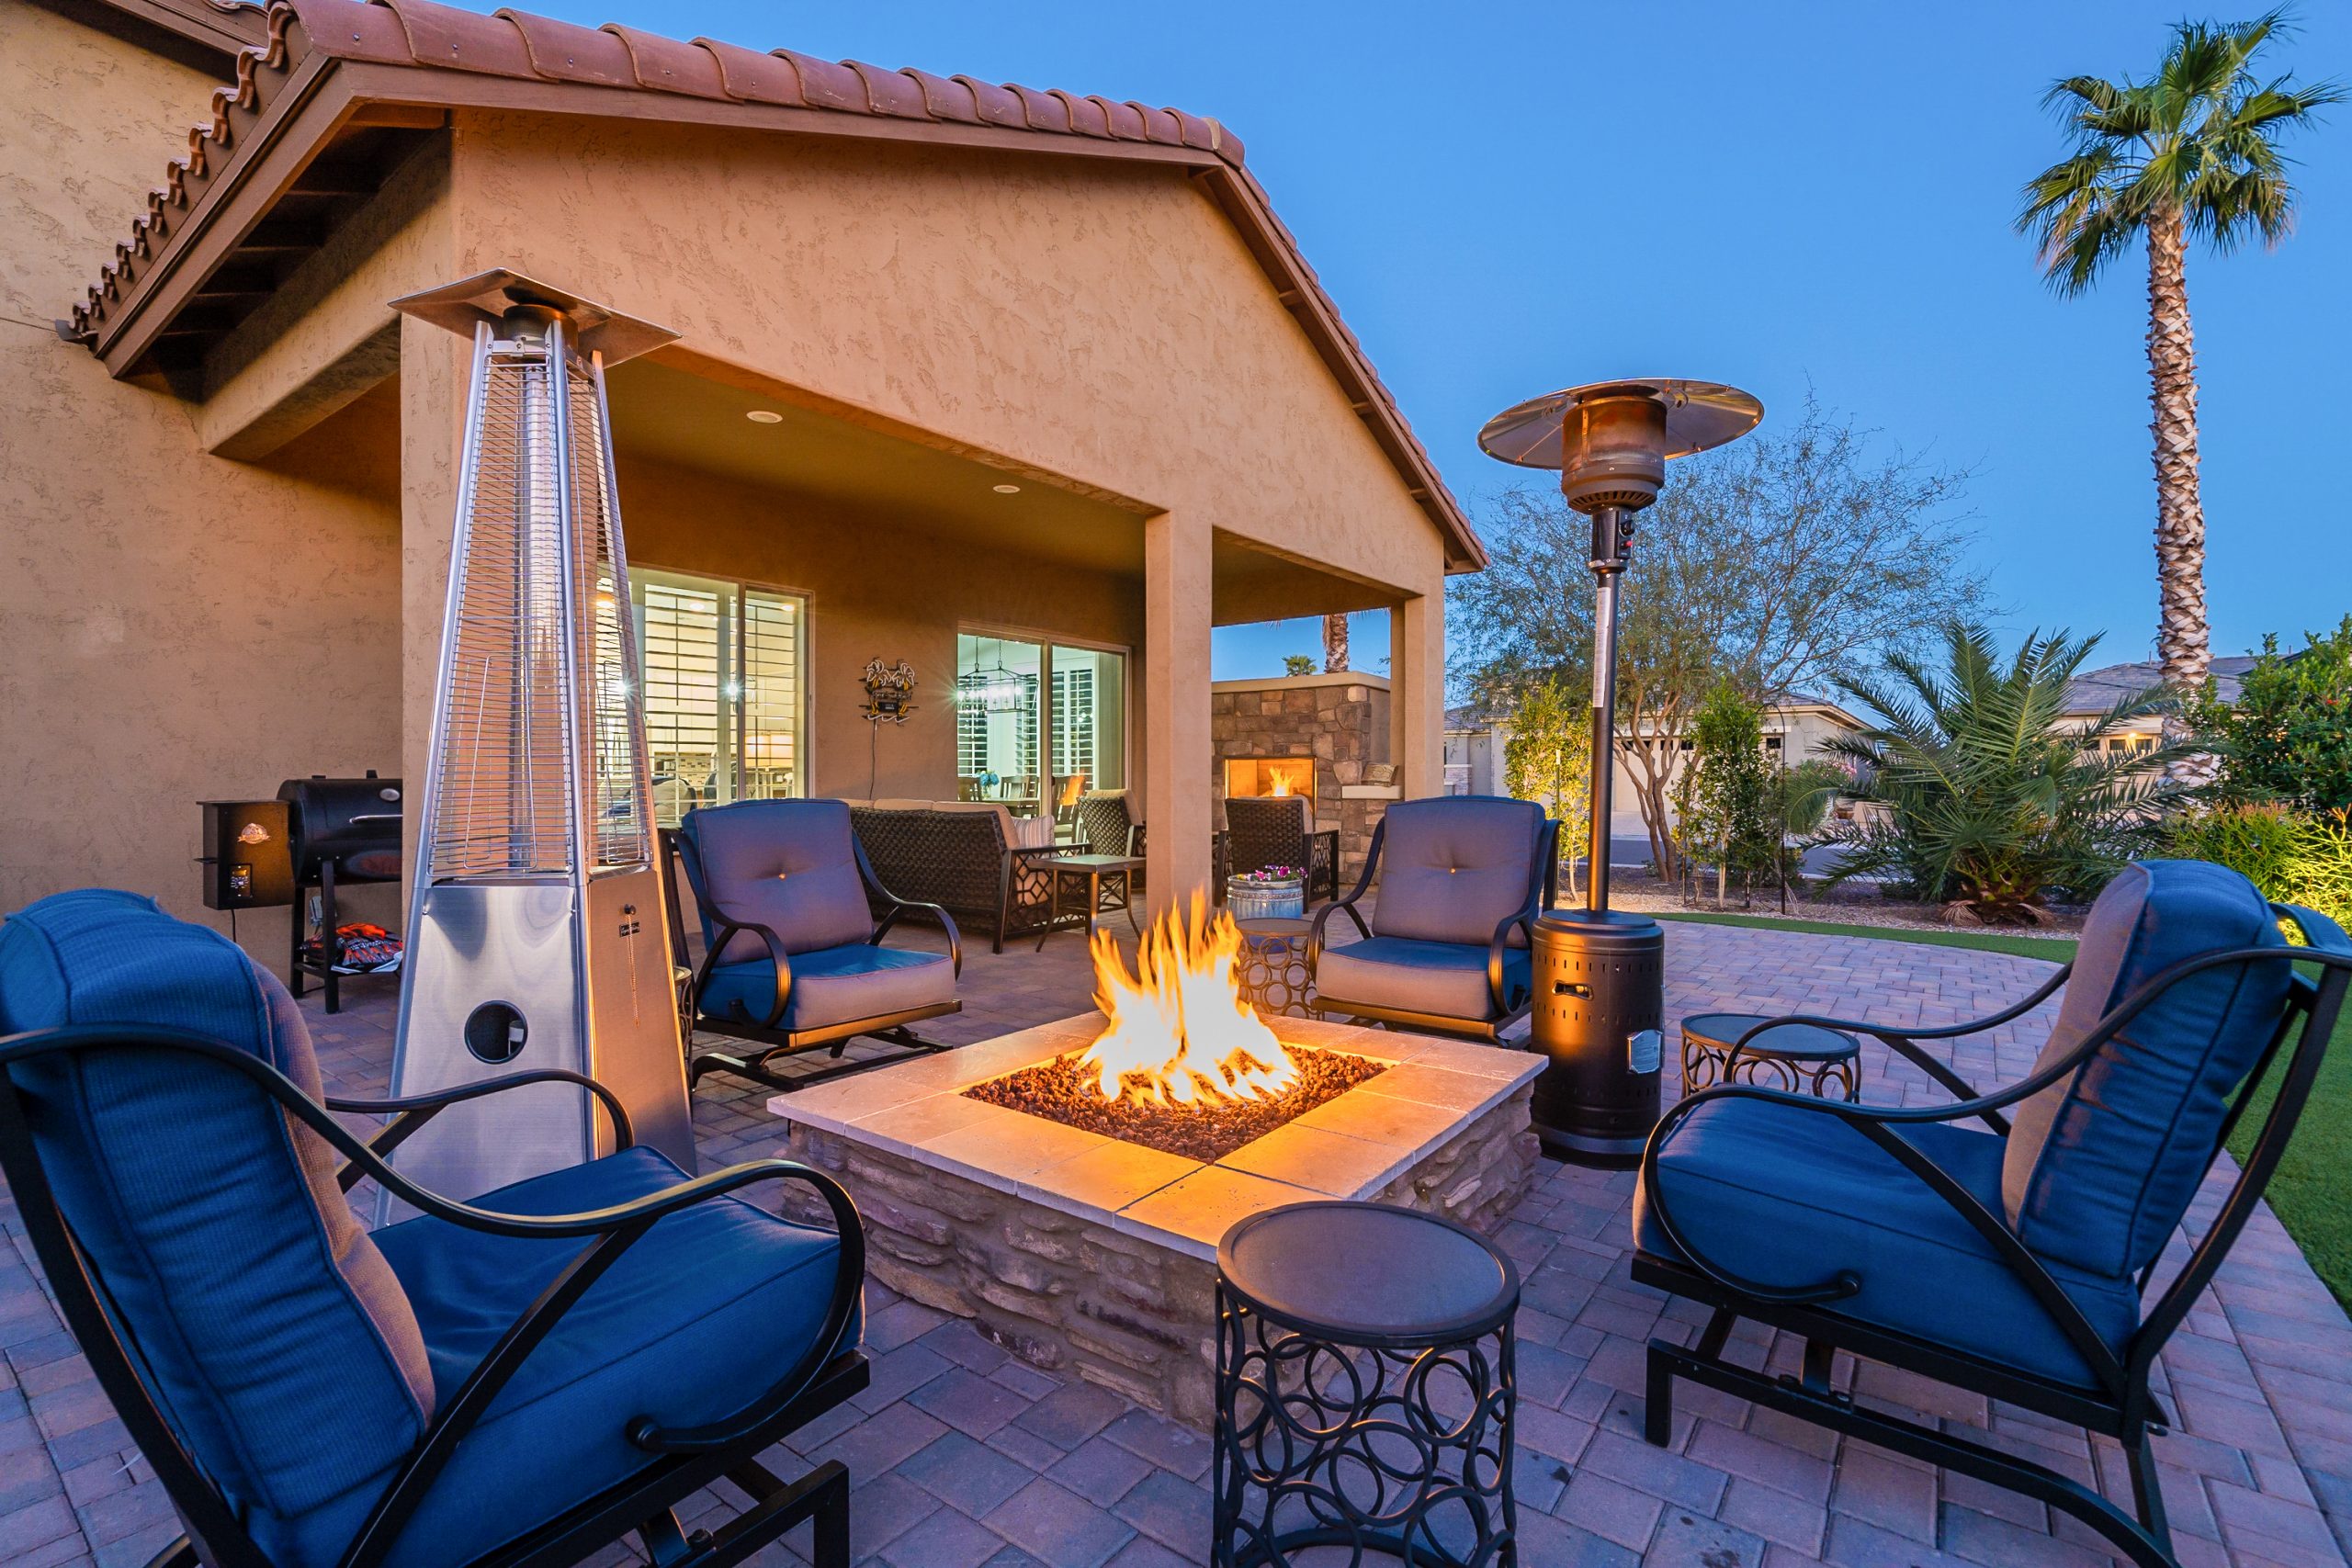 listing photo of a backyard barbecue and chairs in a listing in goodyear, az